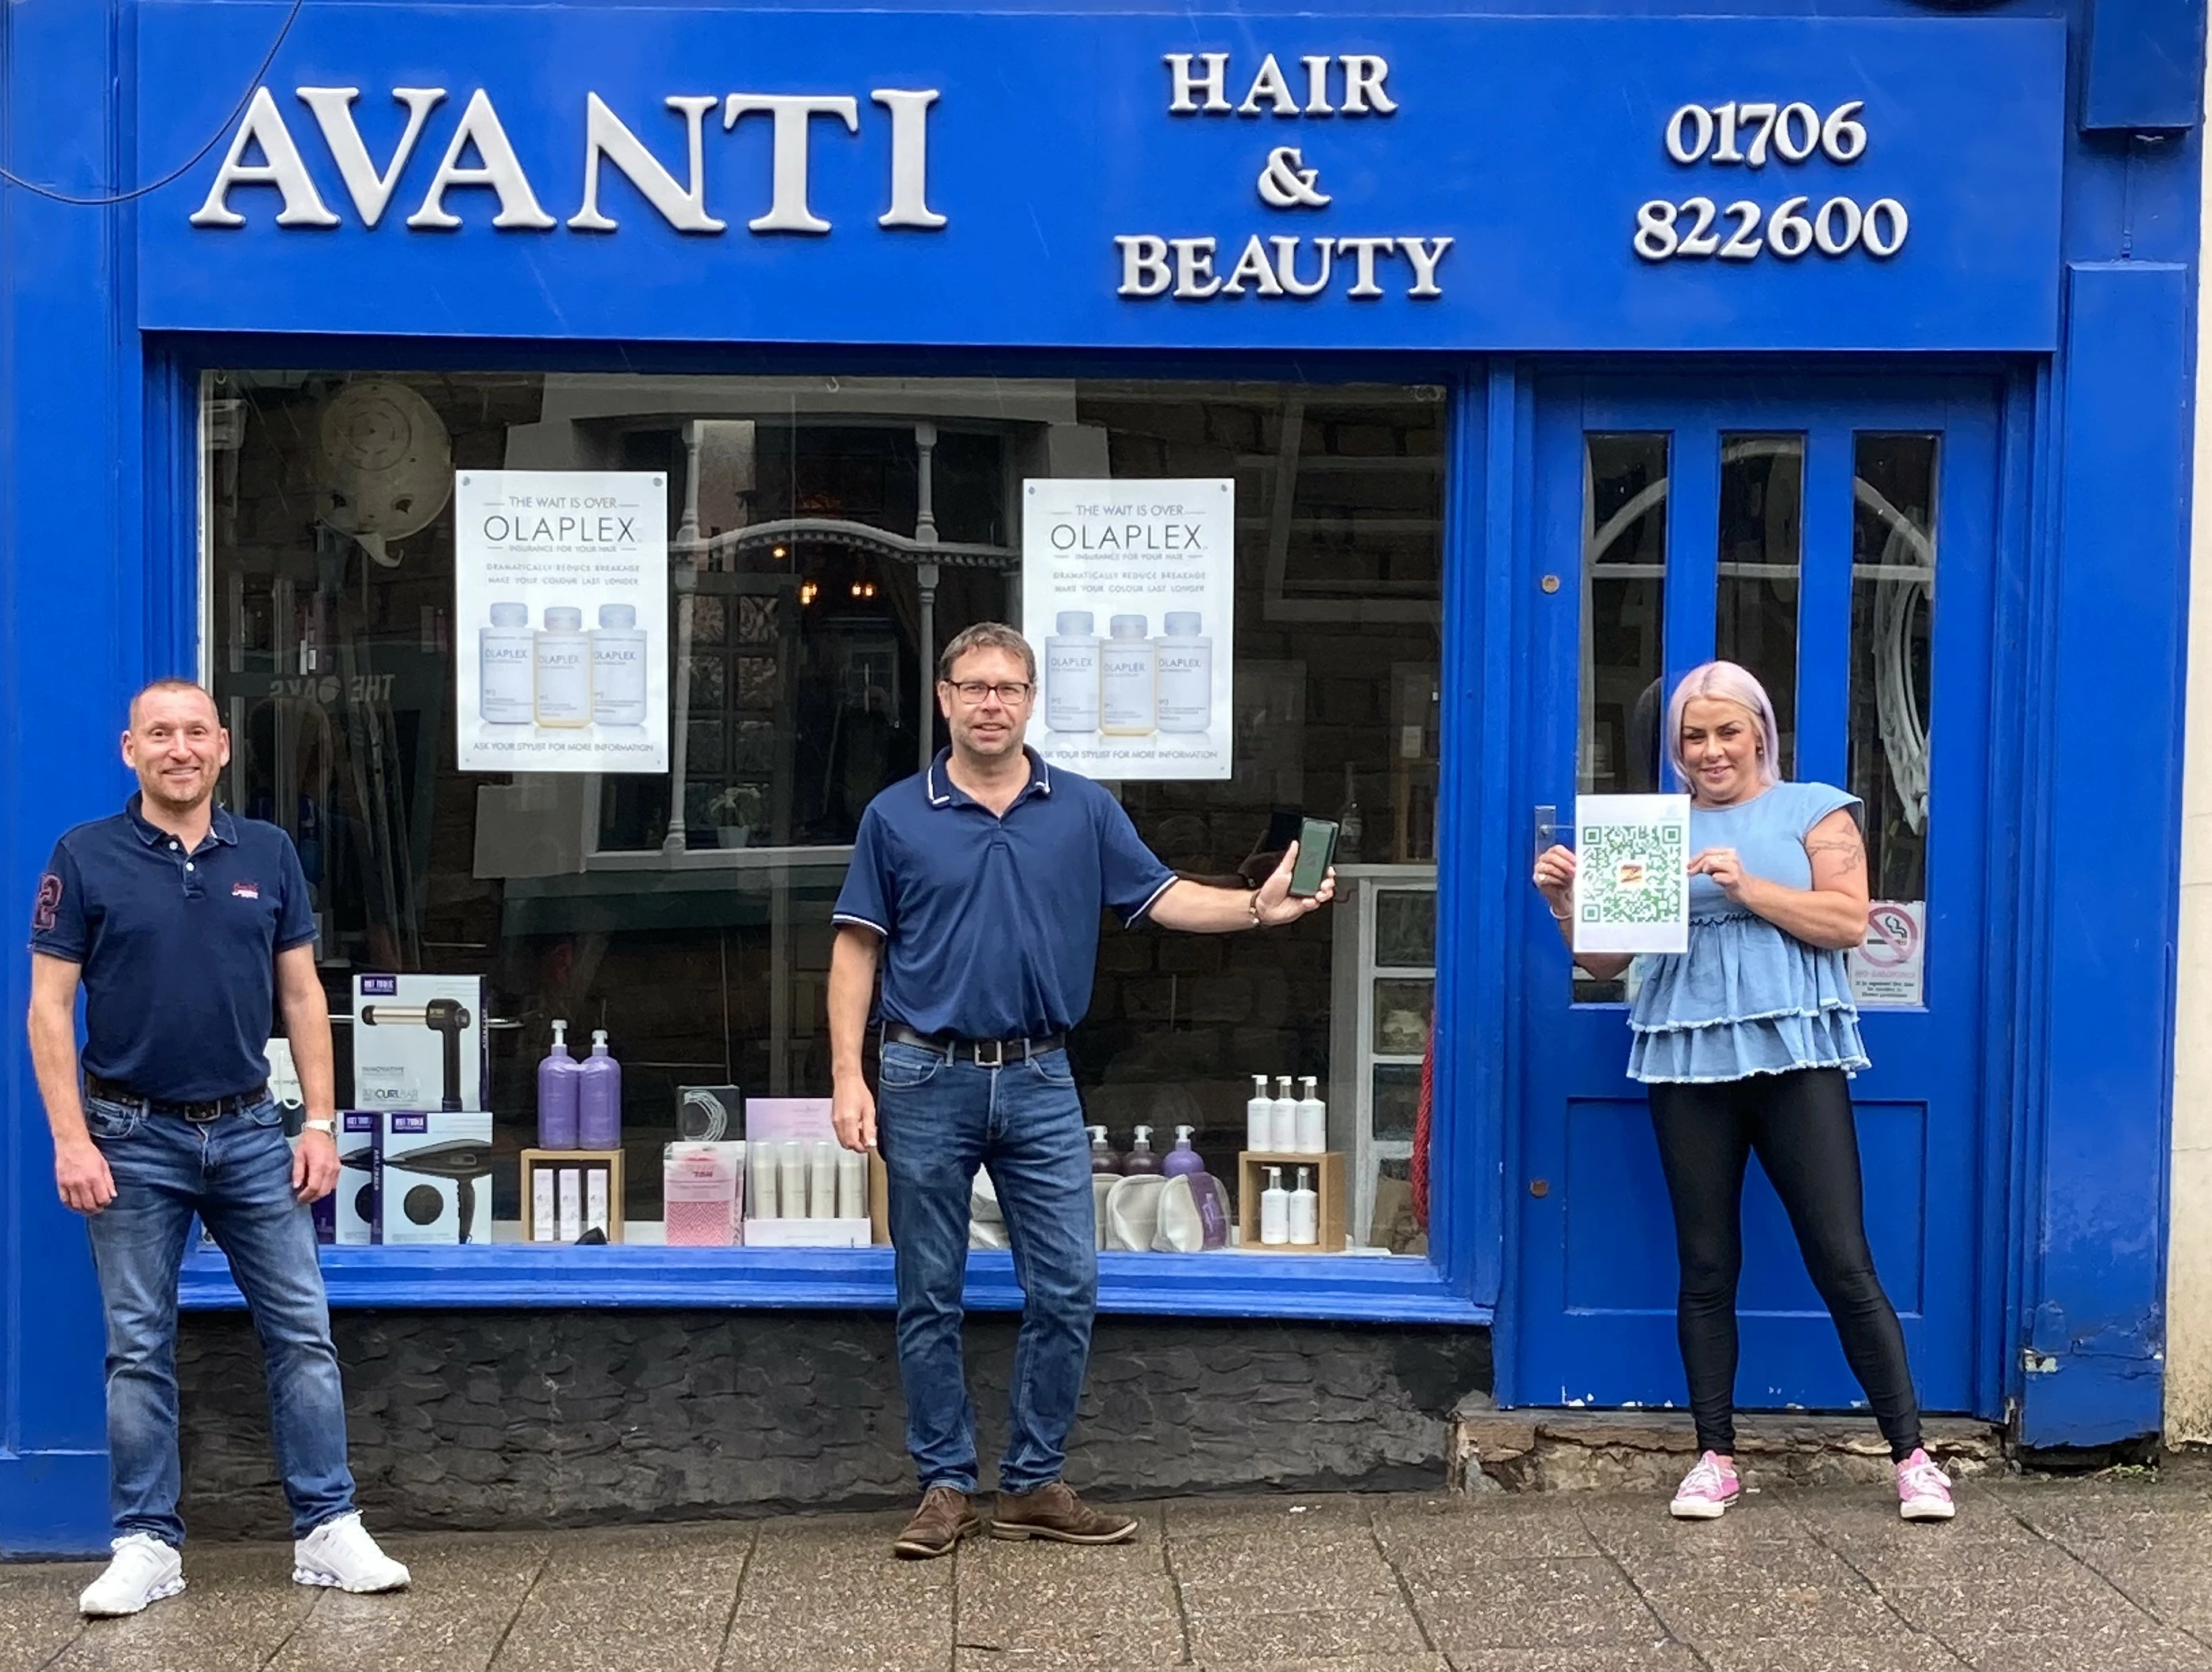 L-R Keith Robinson and Paul Smith of Zappify with Claire Gaskell of Avanti hair and beauty salon